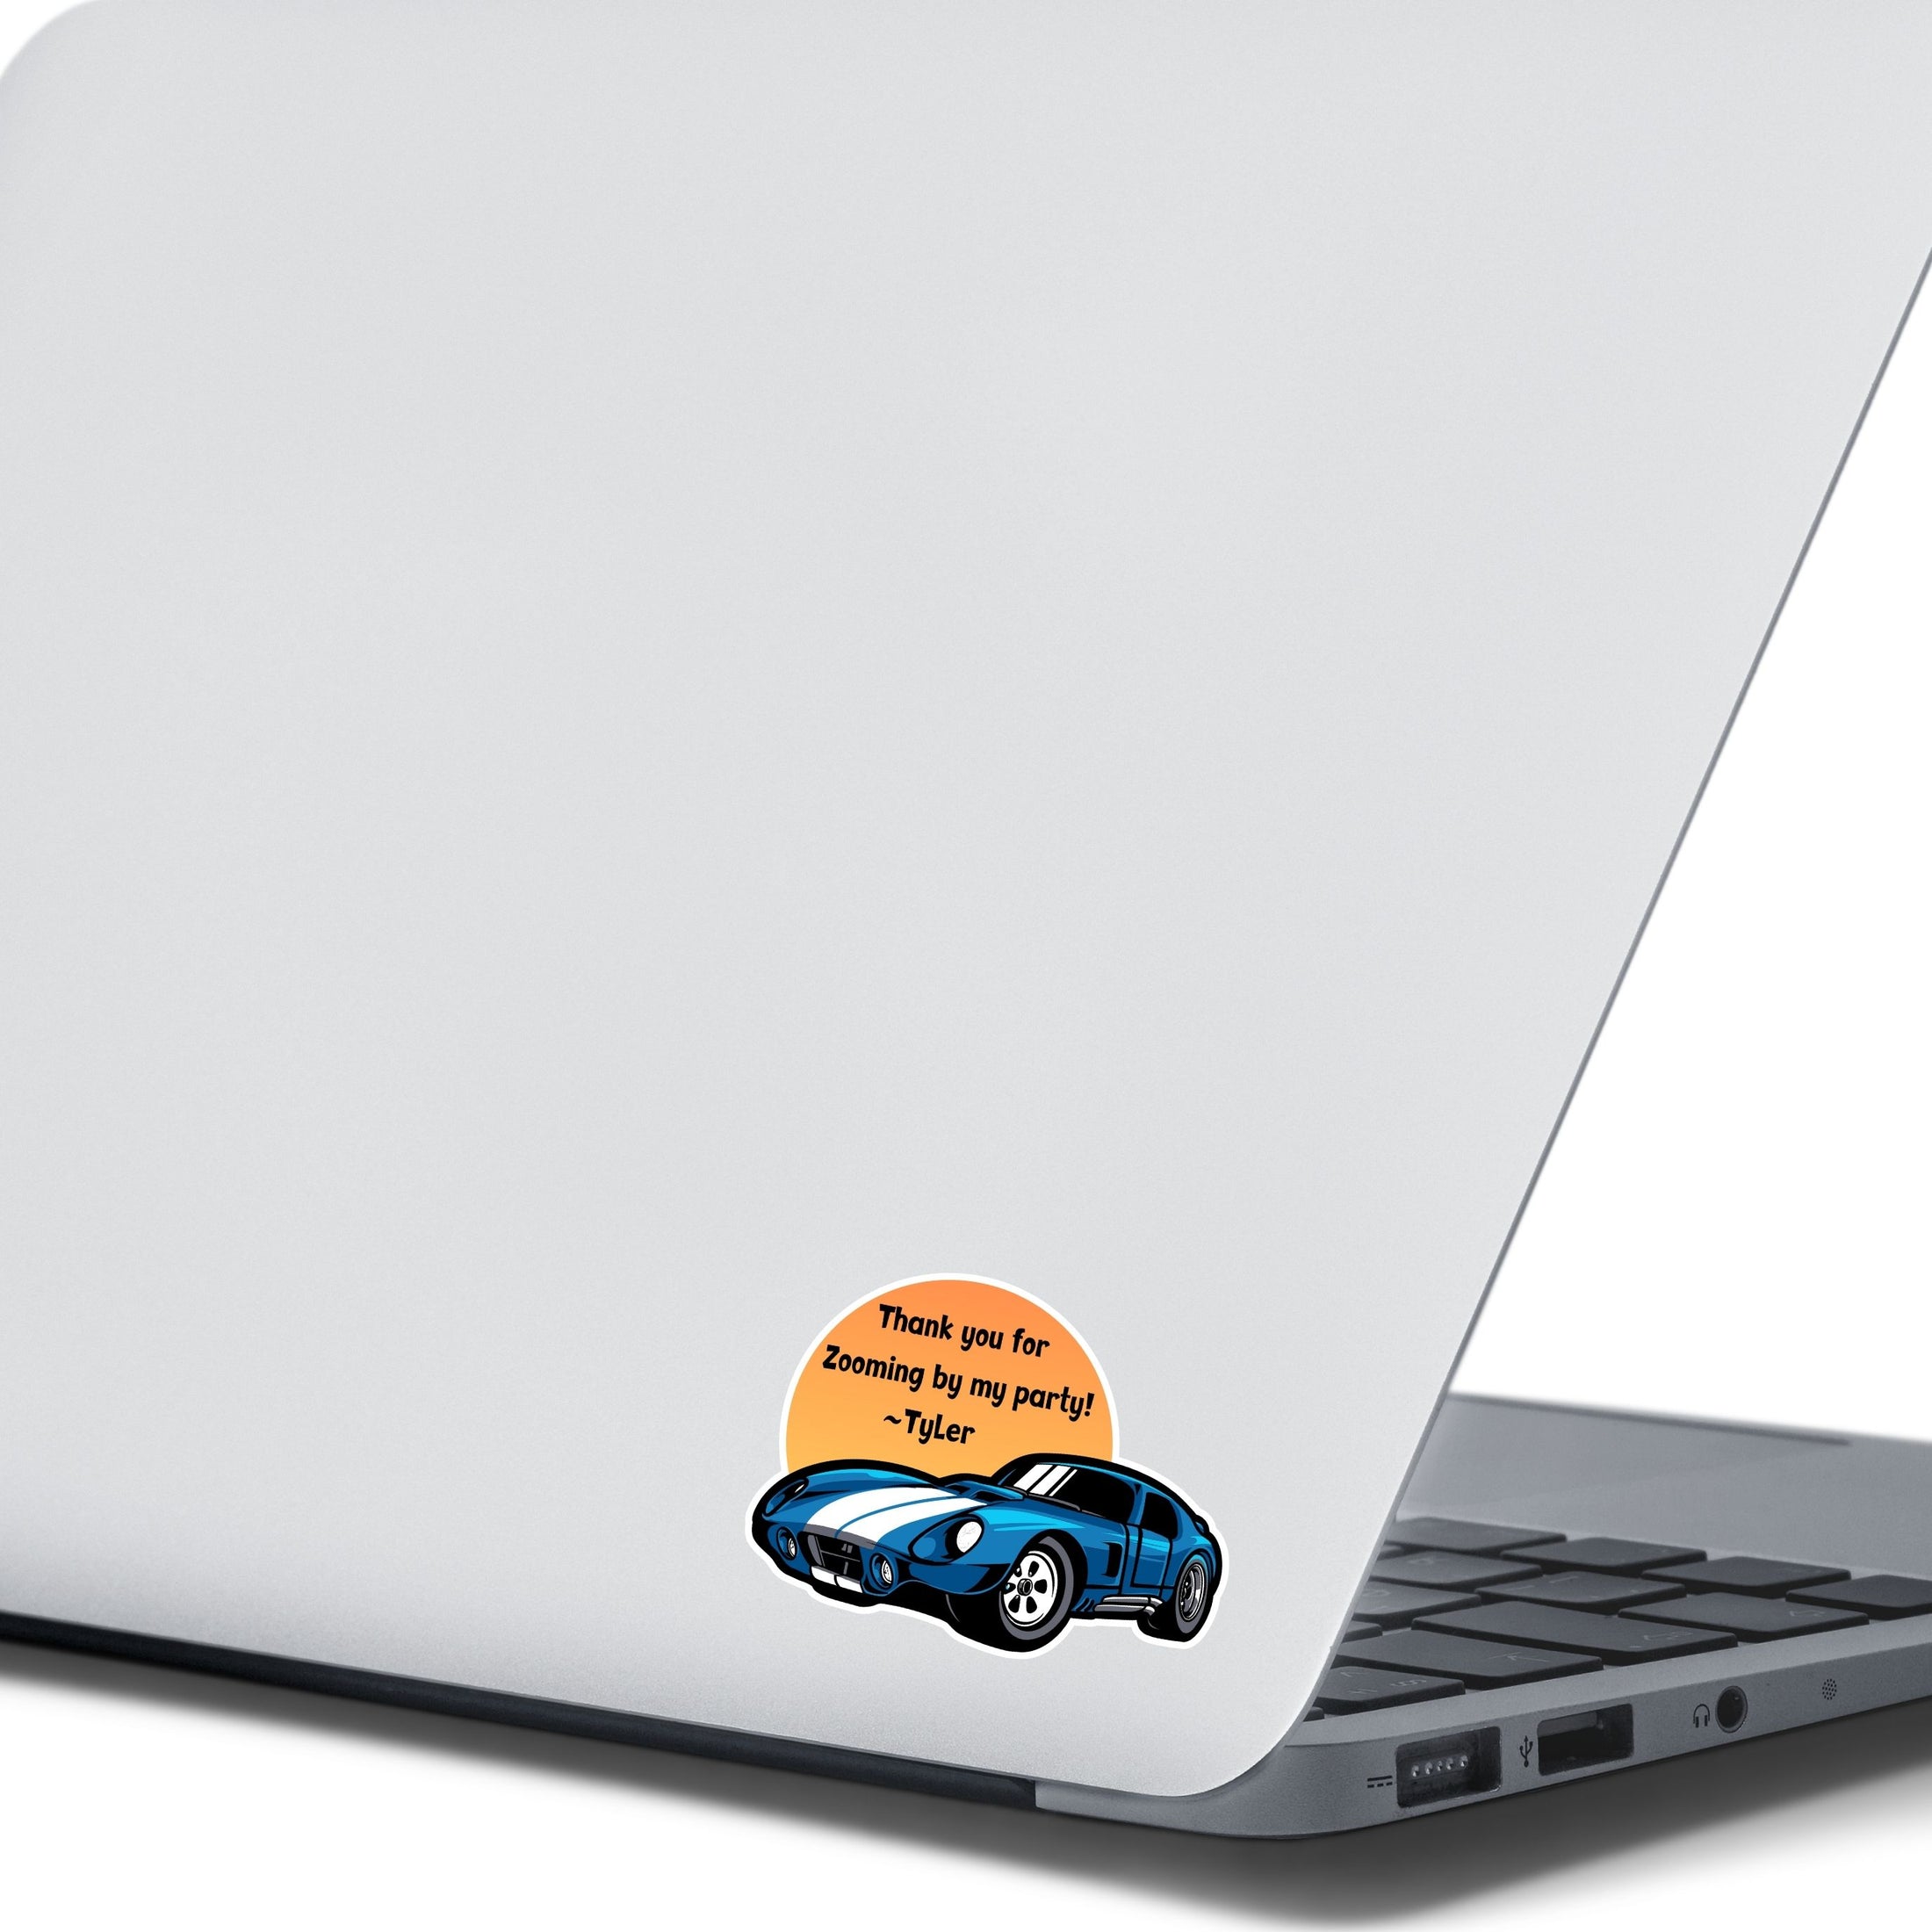 This image shows the zooming by sticker on the back of an open laptop.